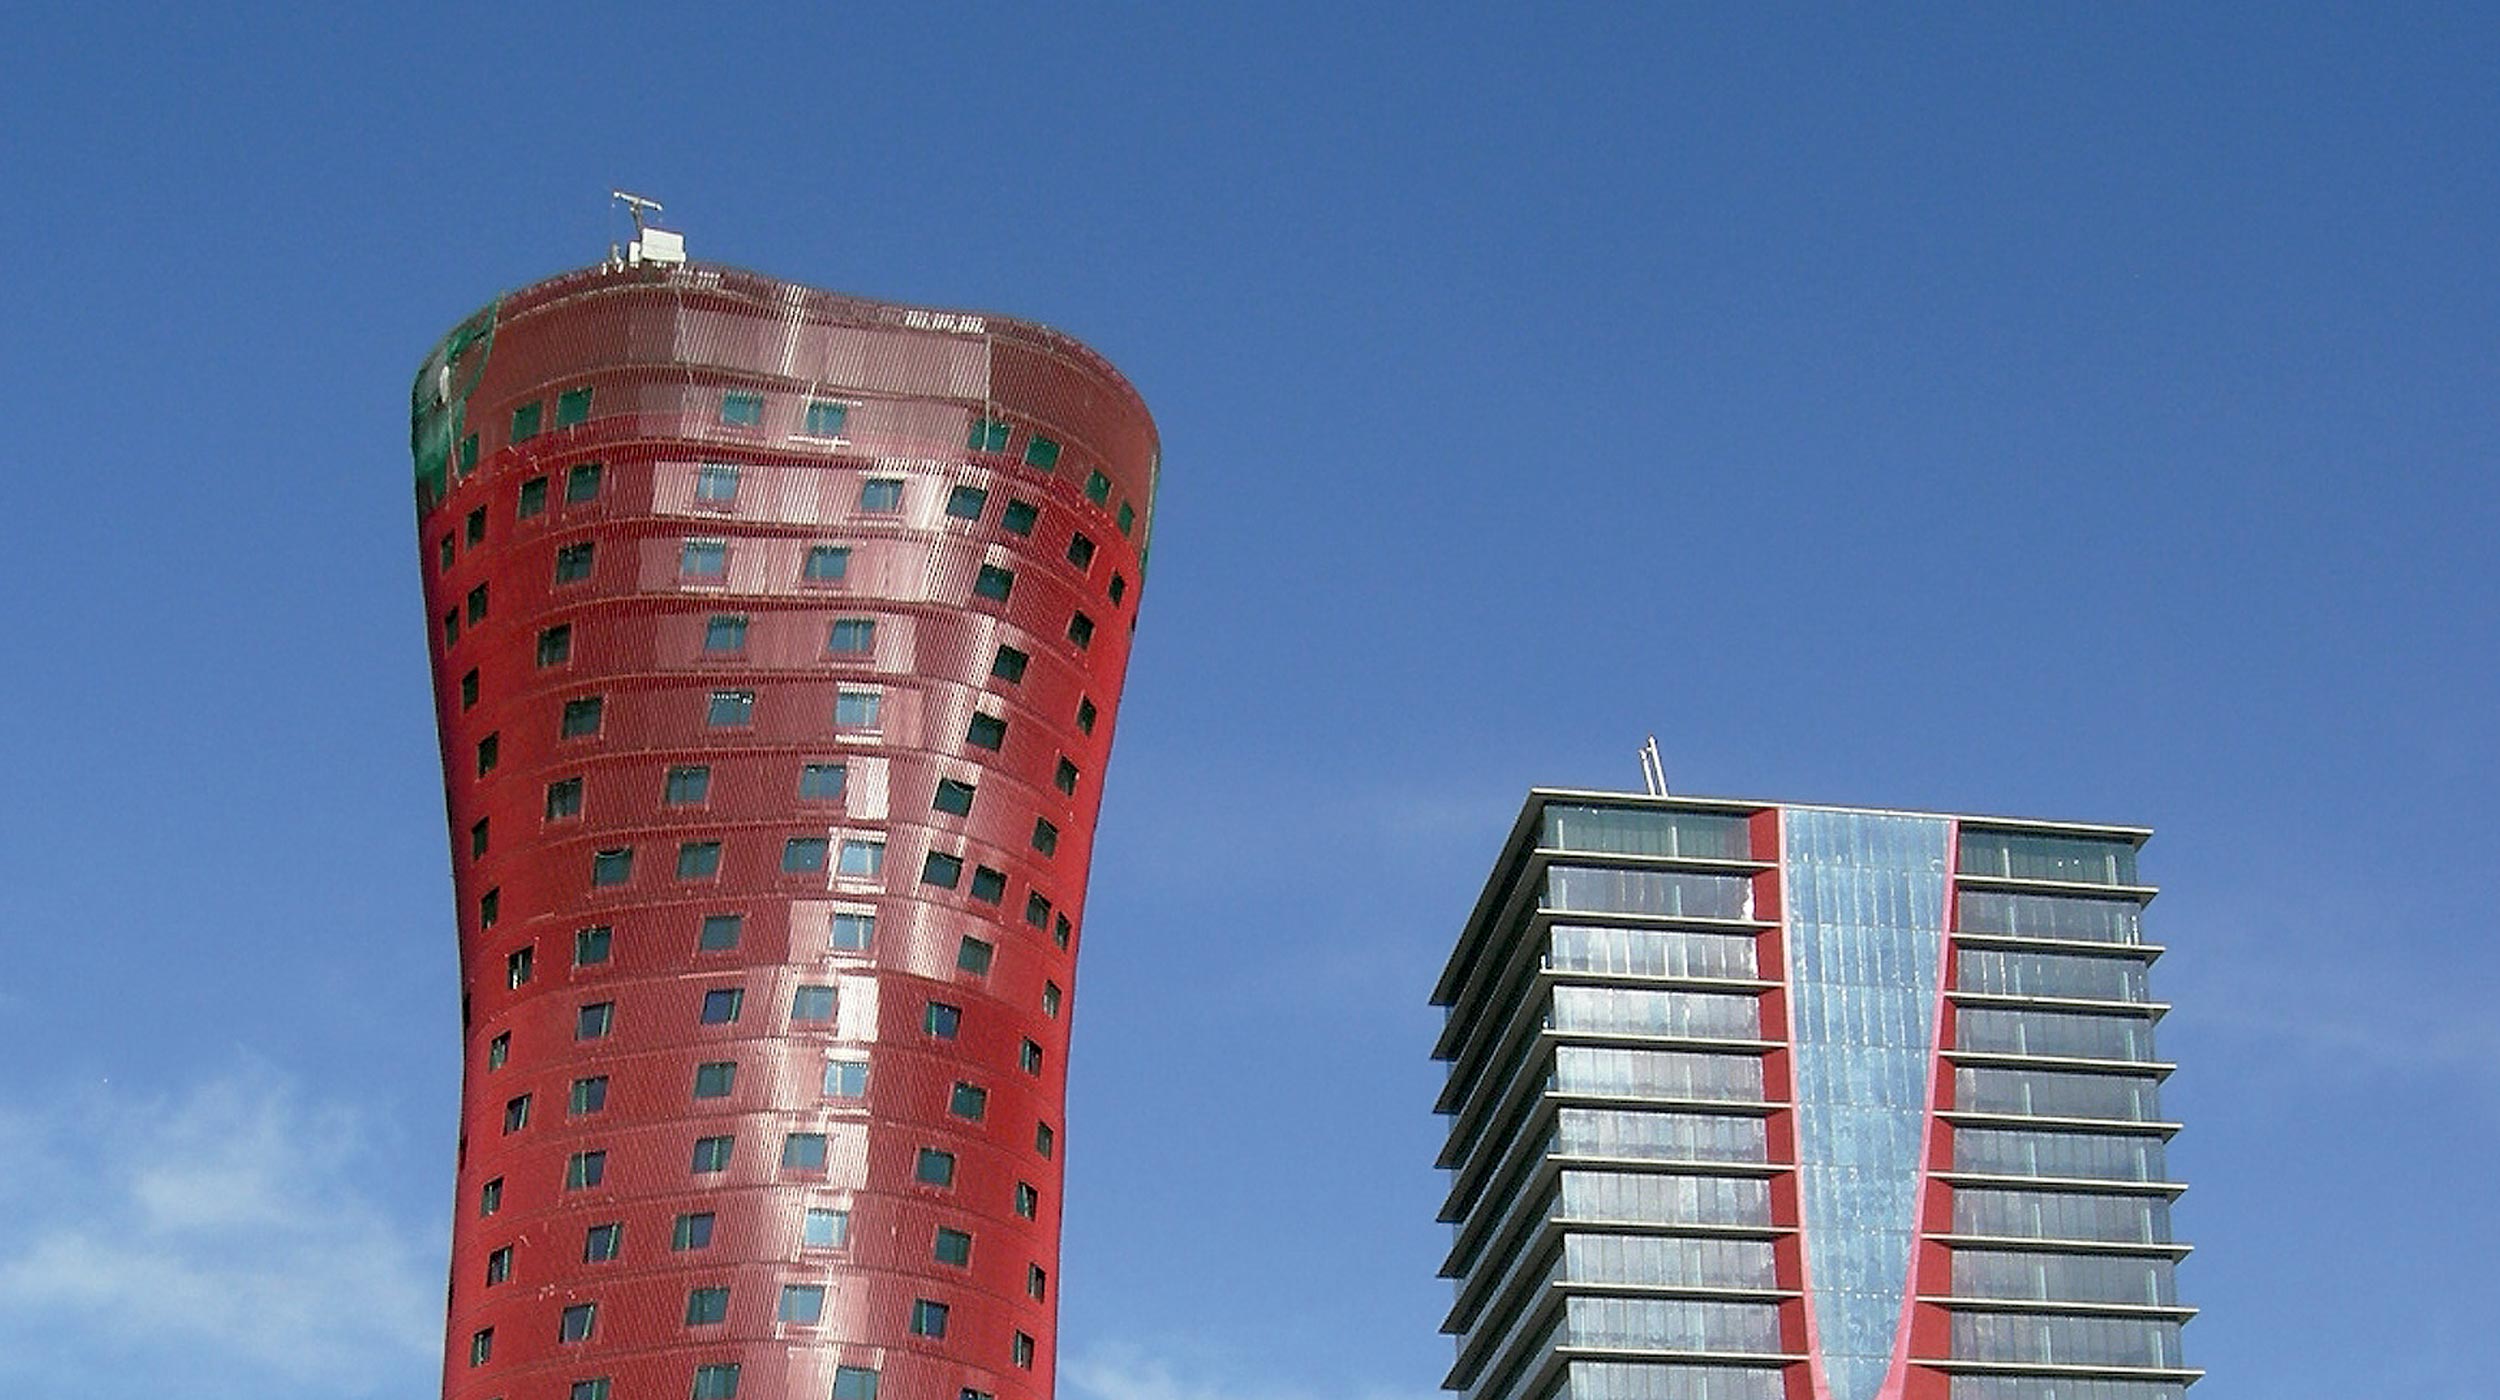 The two towers, designed by the well known architect Toyo Ito, are approximately 120 m high. Each has its own function: one is a hotel and the other is a 40,000 m² office building.